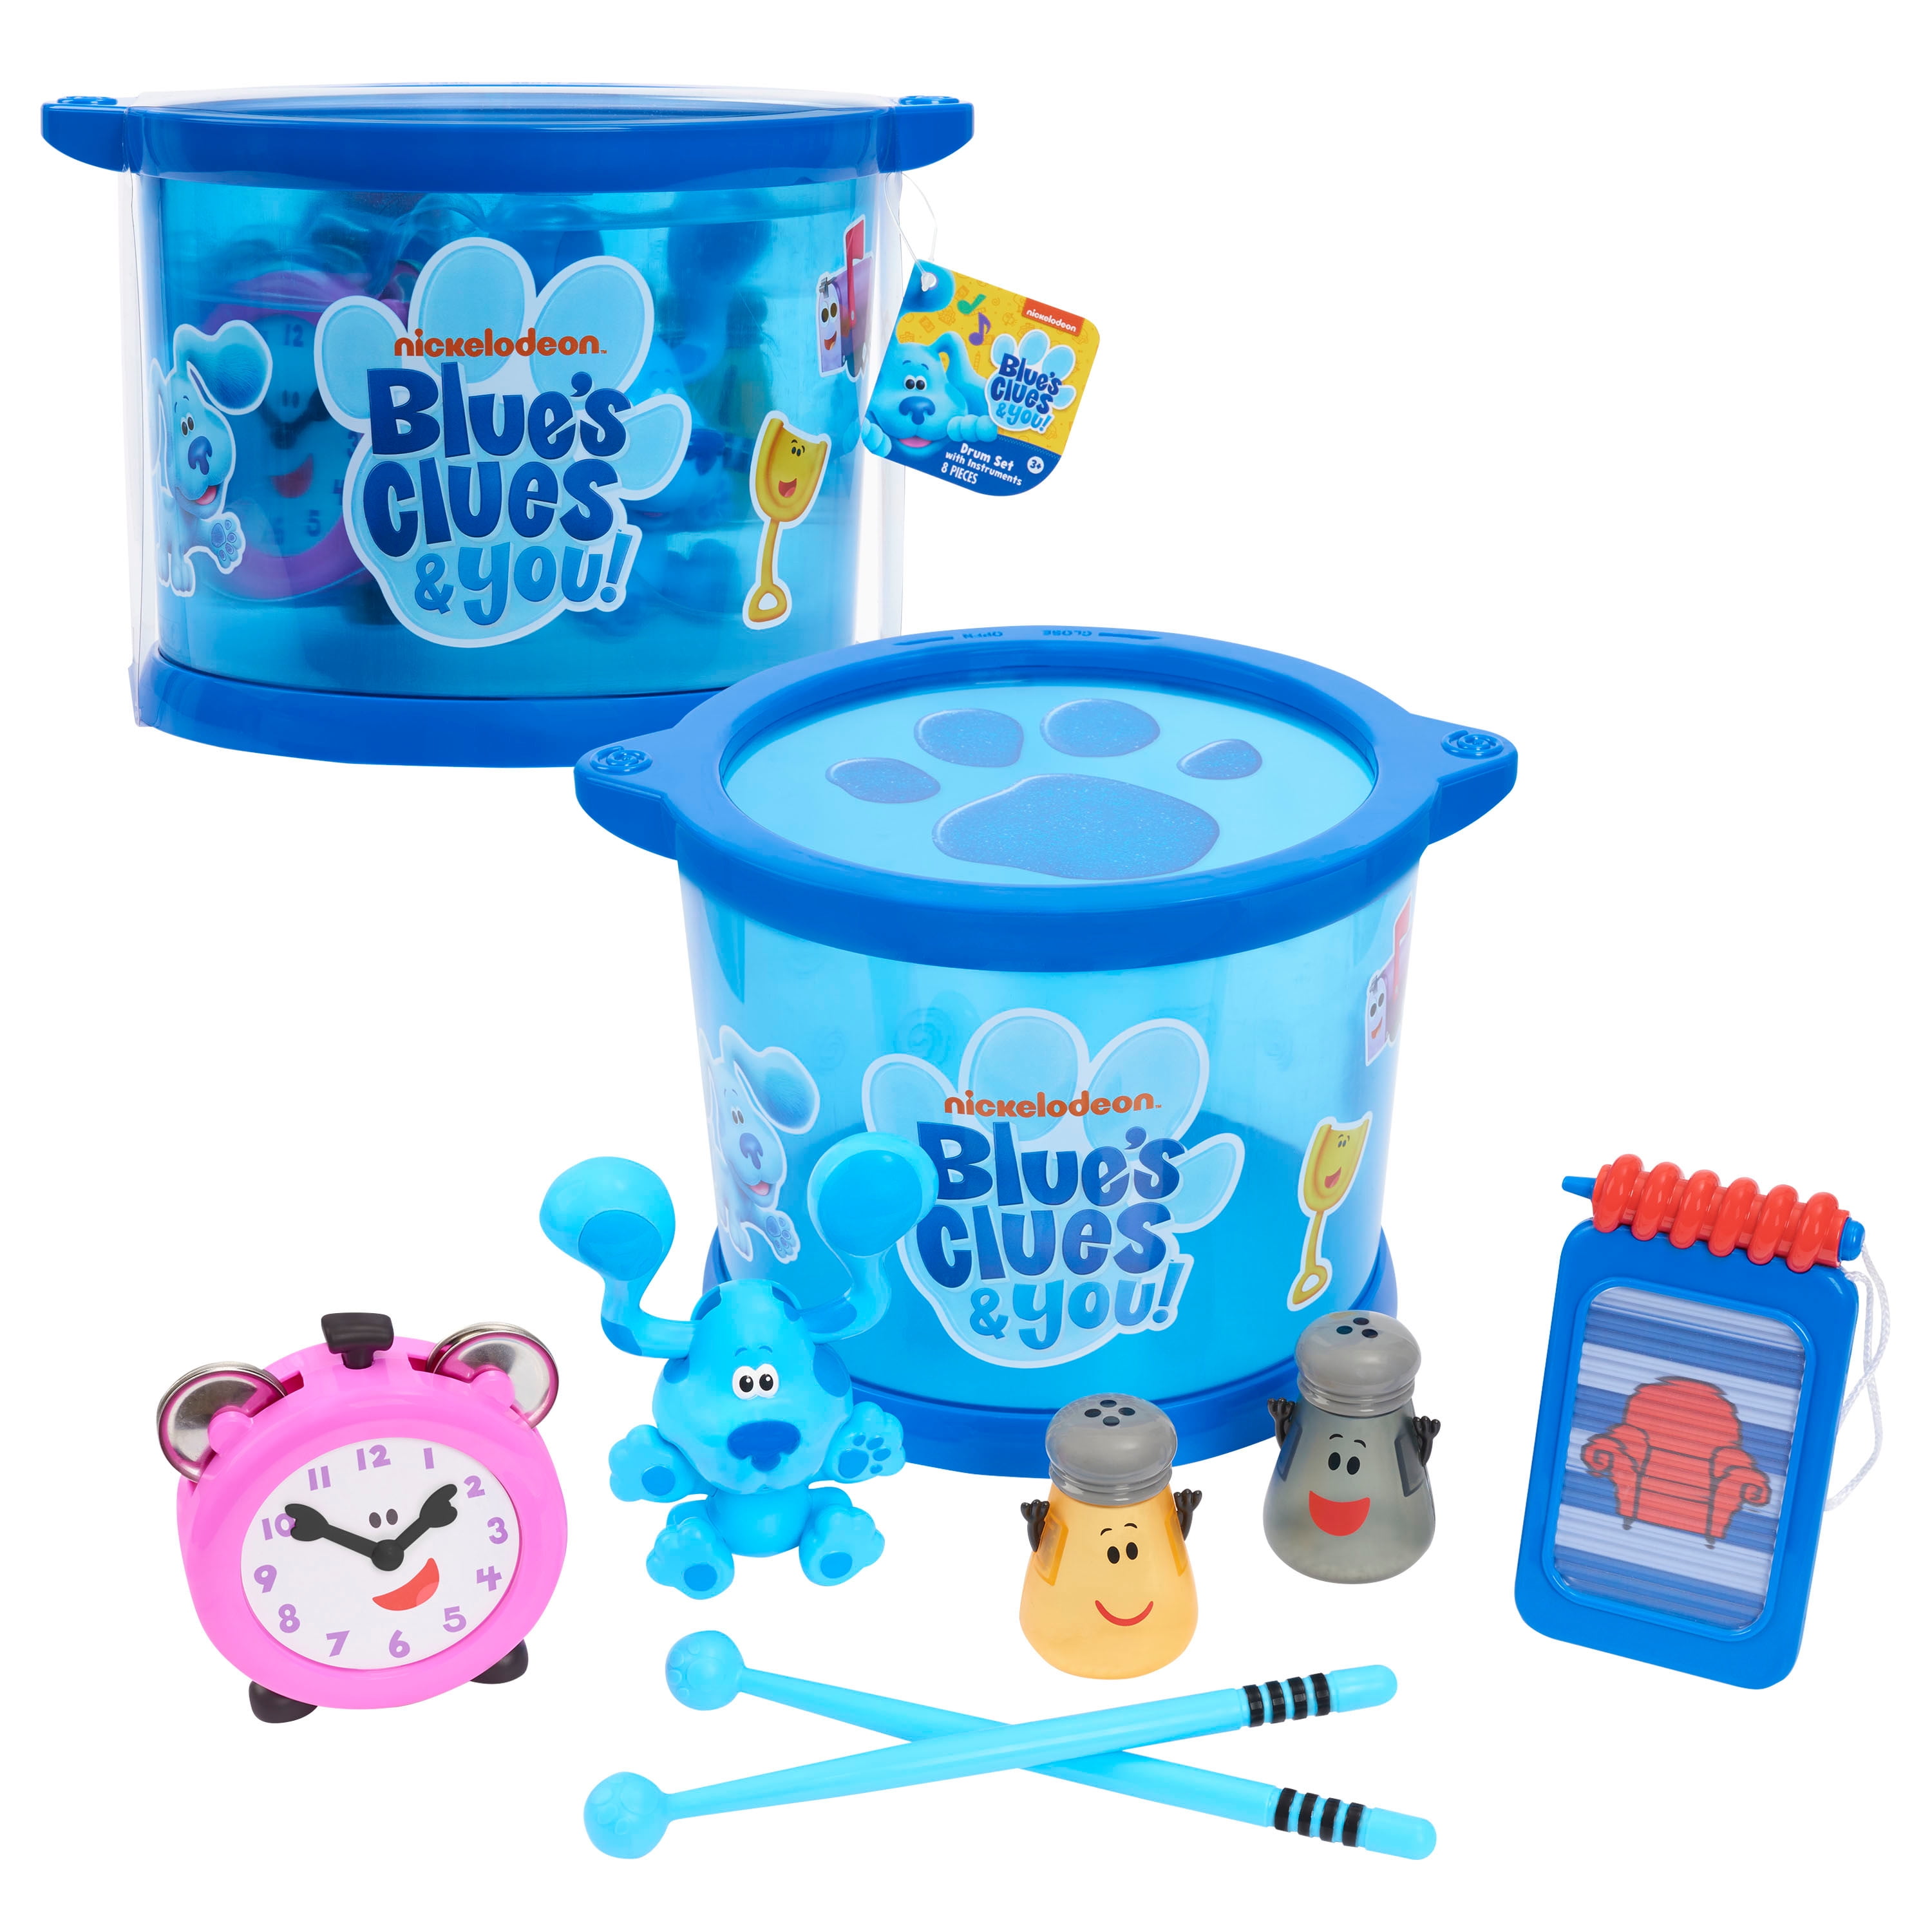 Kids will love cluing into music with Blue and friends with the Blue’s Clue...